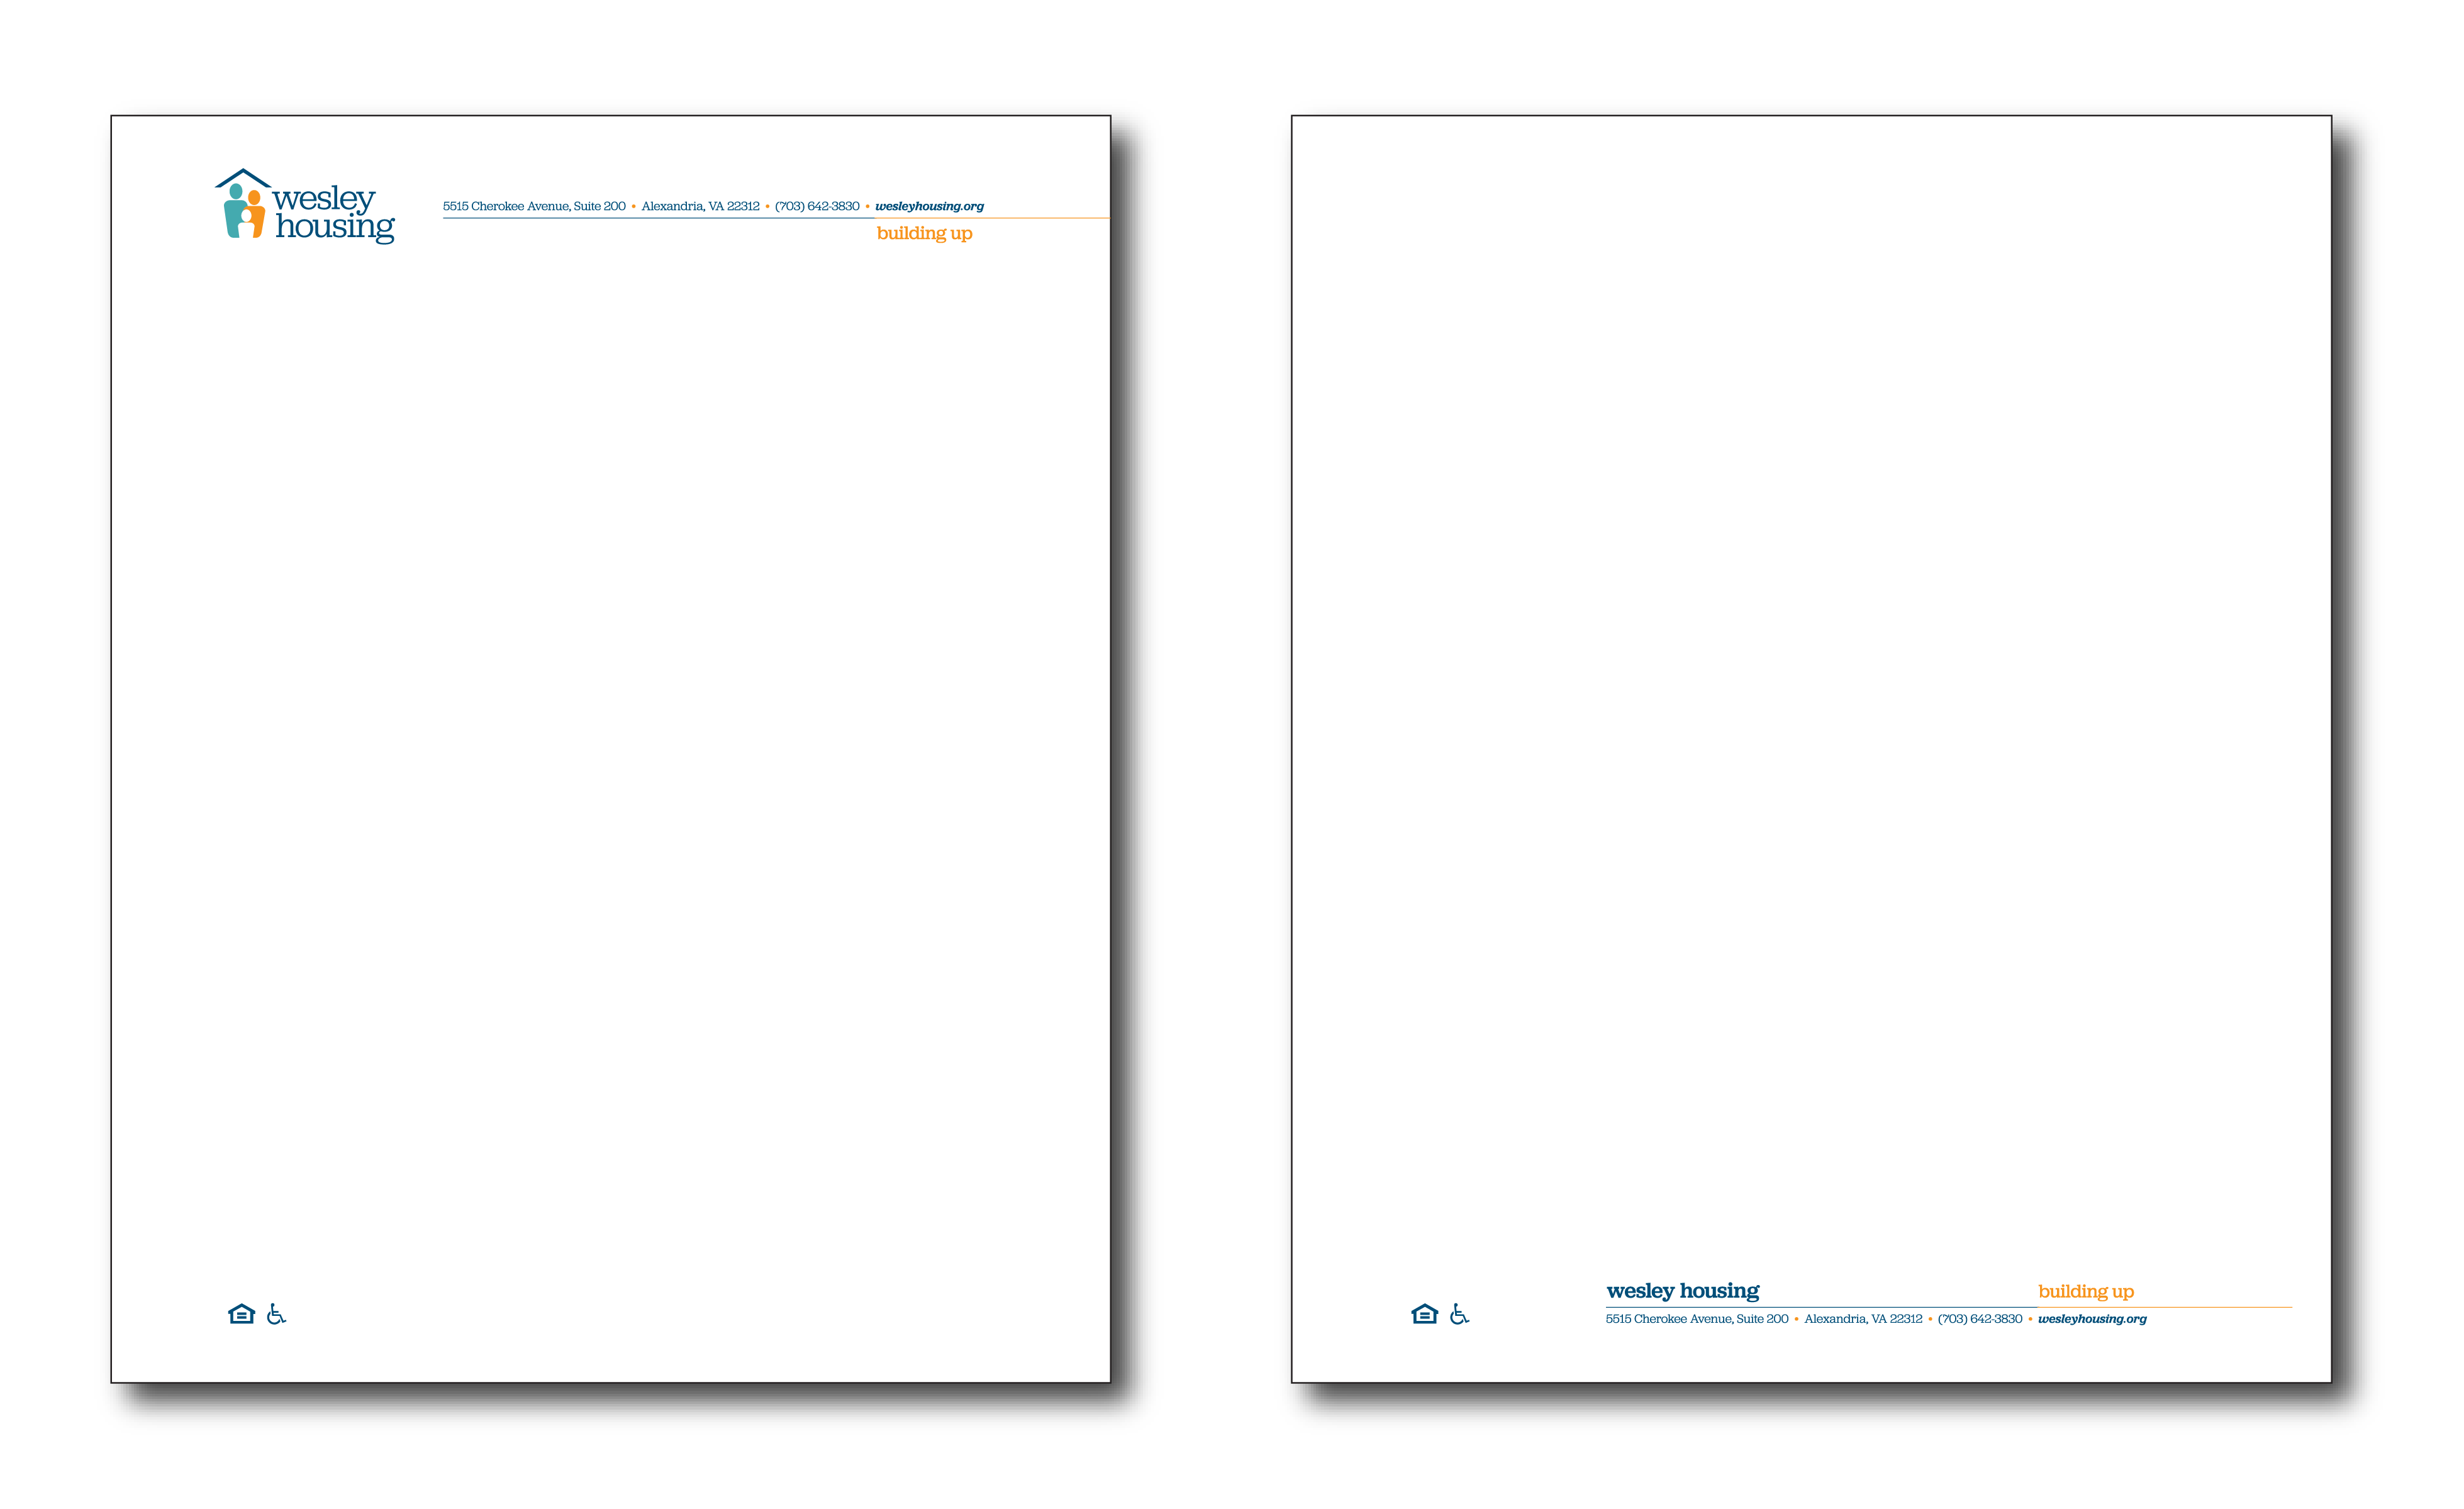 letterhead template for Wesley client